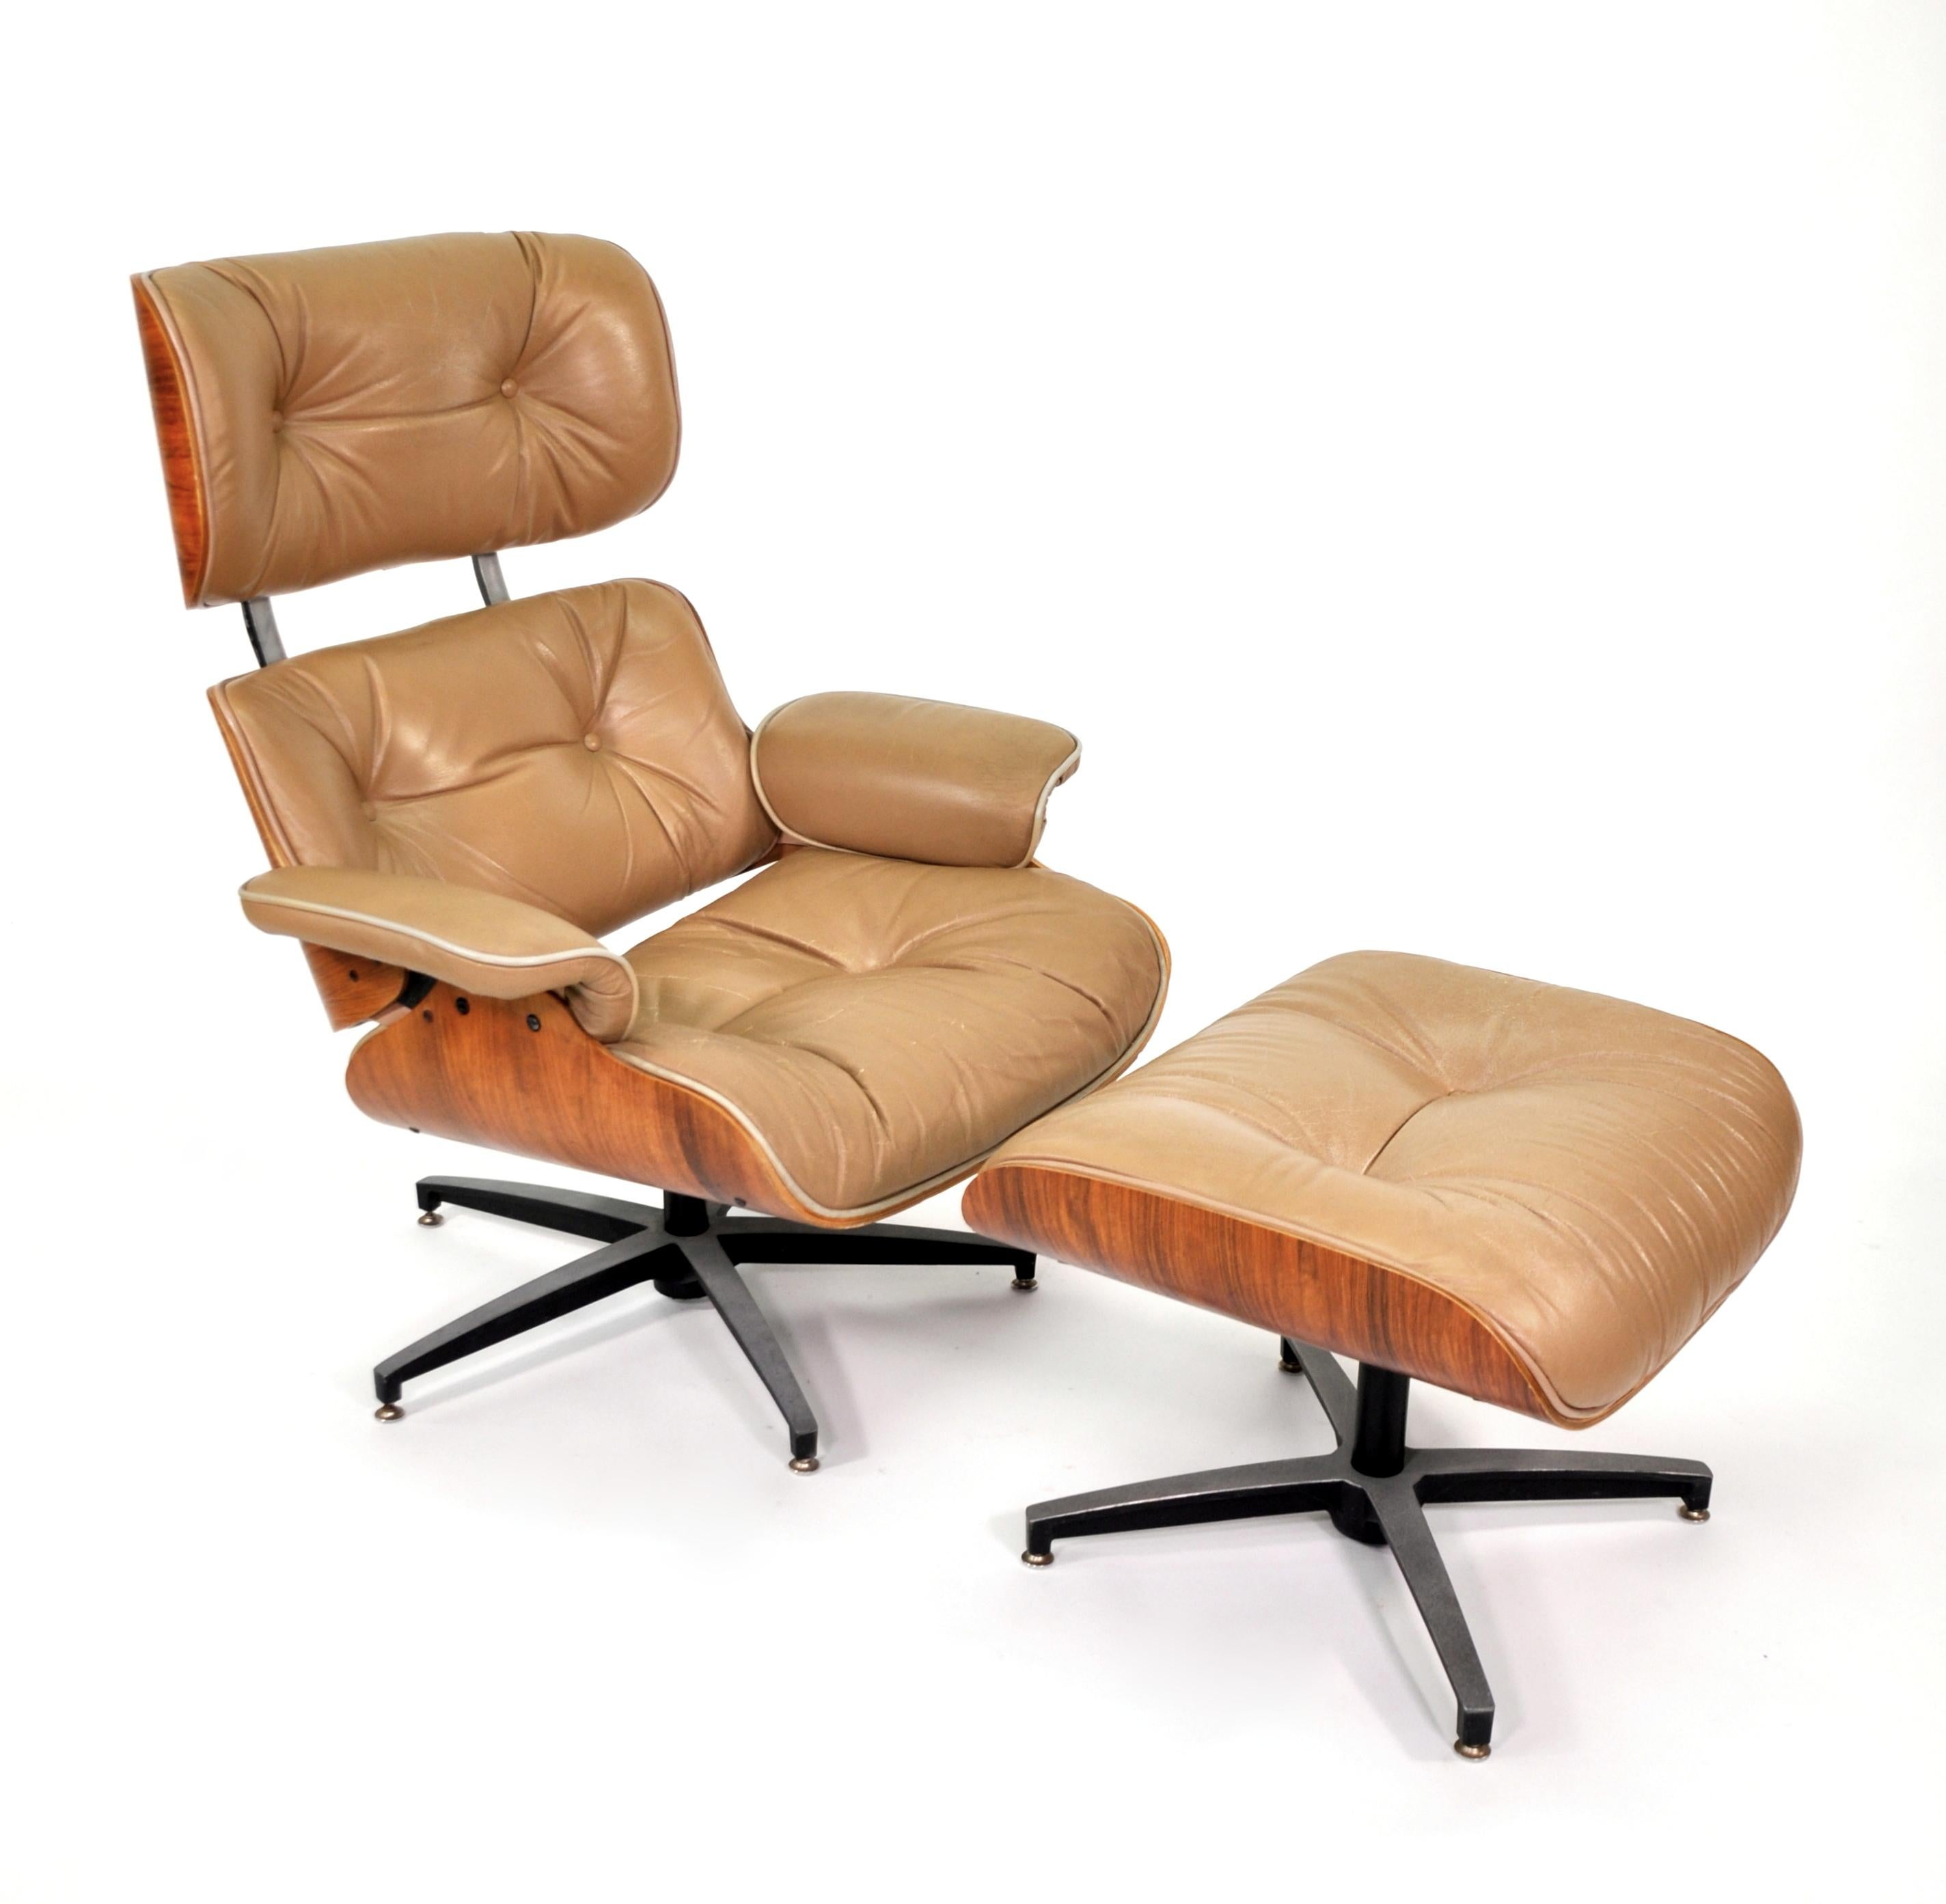 Vintage Mid-Century Modern tan leather Eames style lounge and stool, by Frank Doerner for Selig, dating from the 1960s. The swivel armchair tilts or reclines, and is very comfortable, the footstool is fixed. They feature walnut bentwood shells with